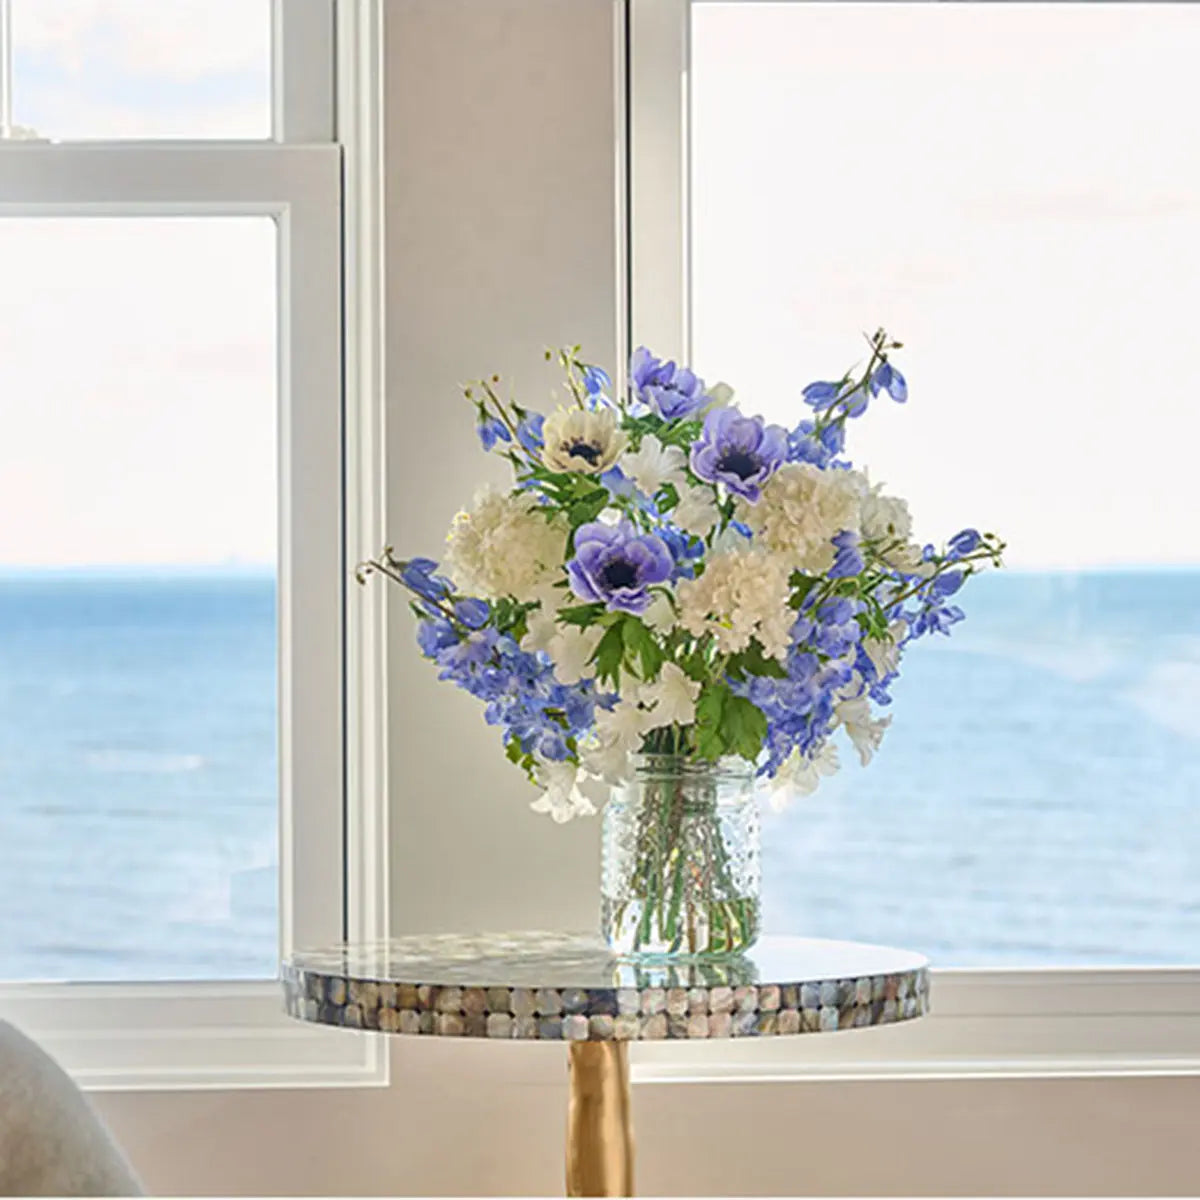 Diane James Blooms Blue Delphinium and Anemones in Vase set on a round table in a room with windows, showing the water and ocean.